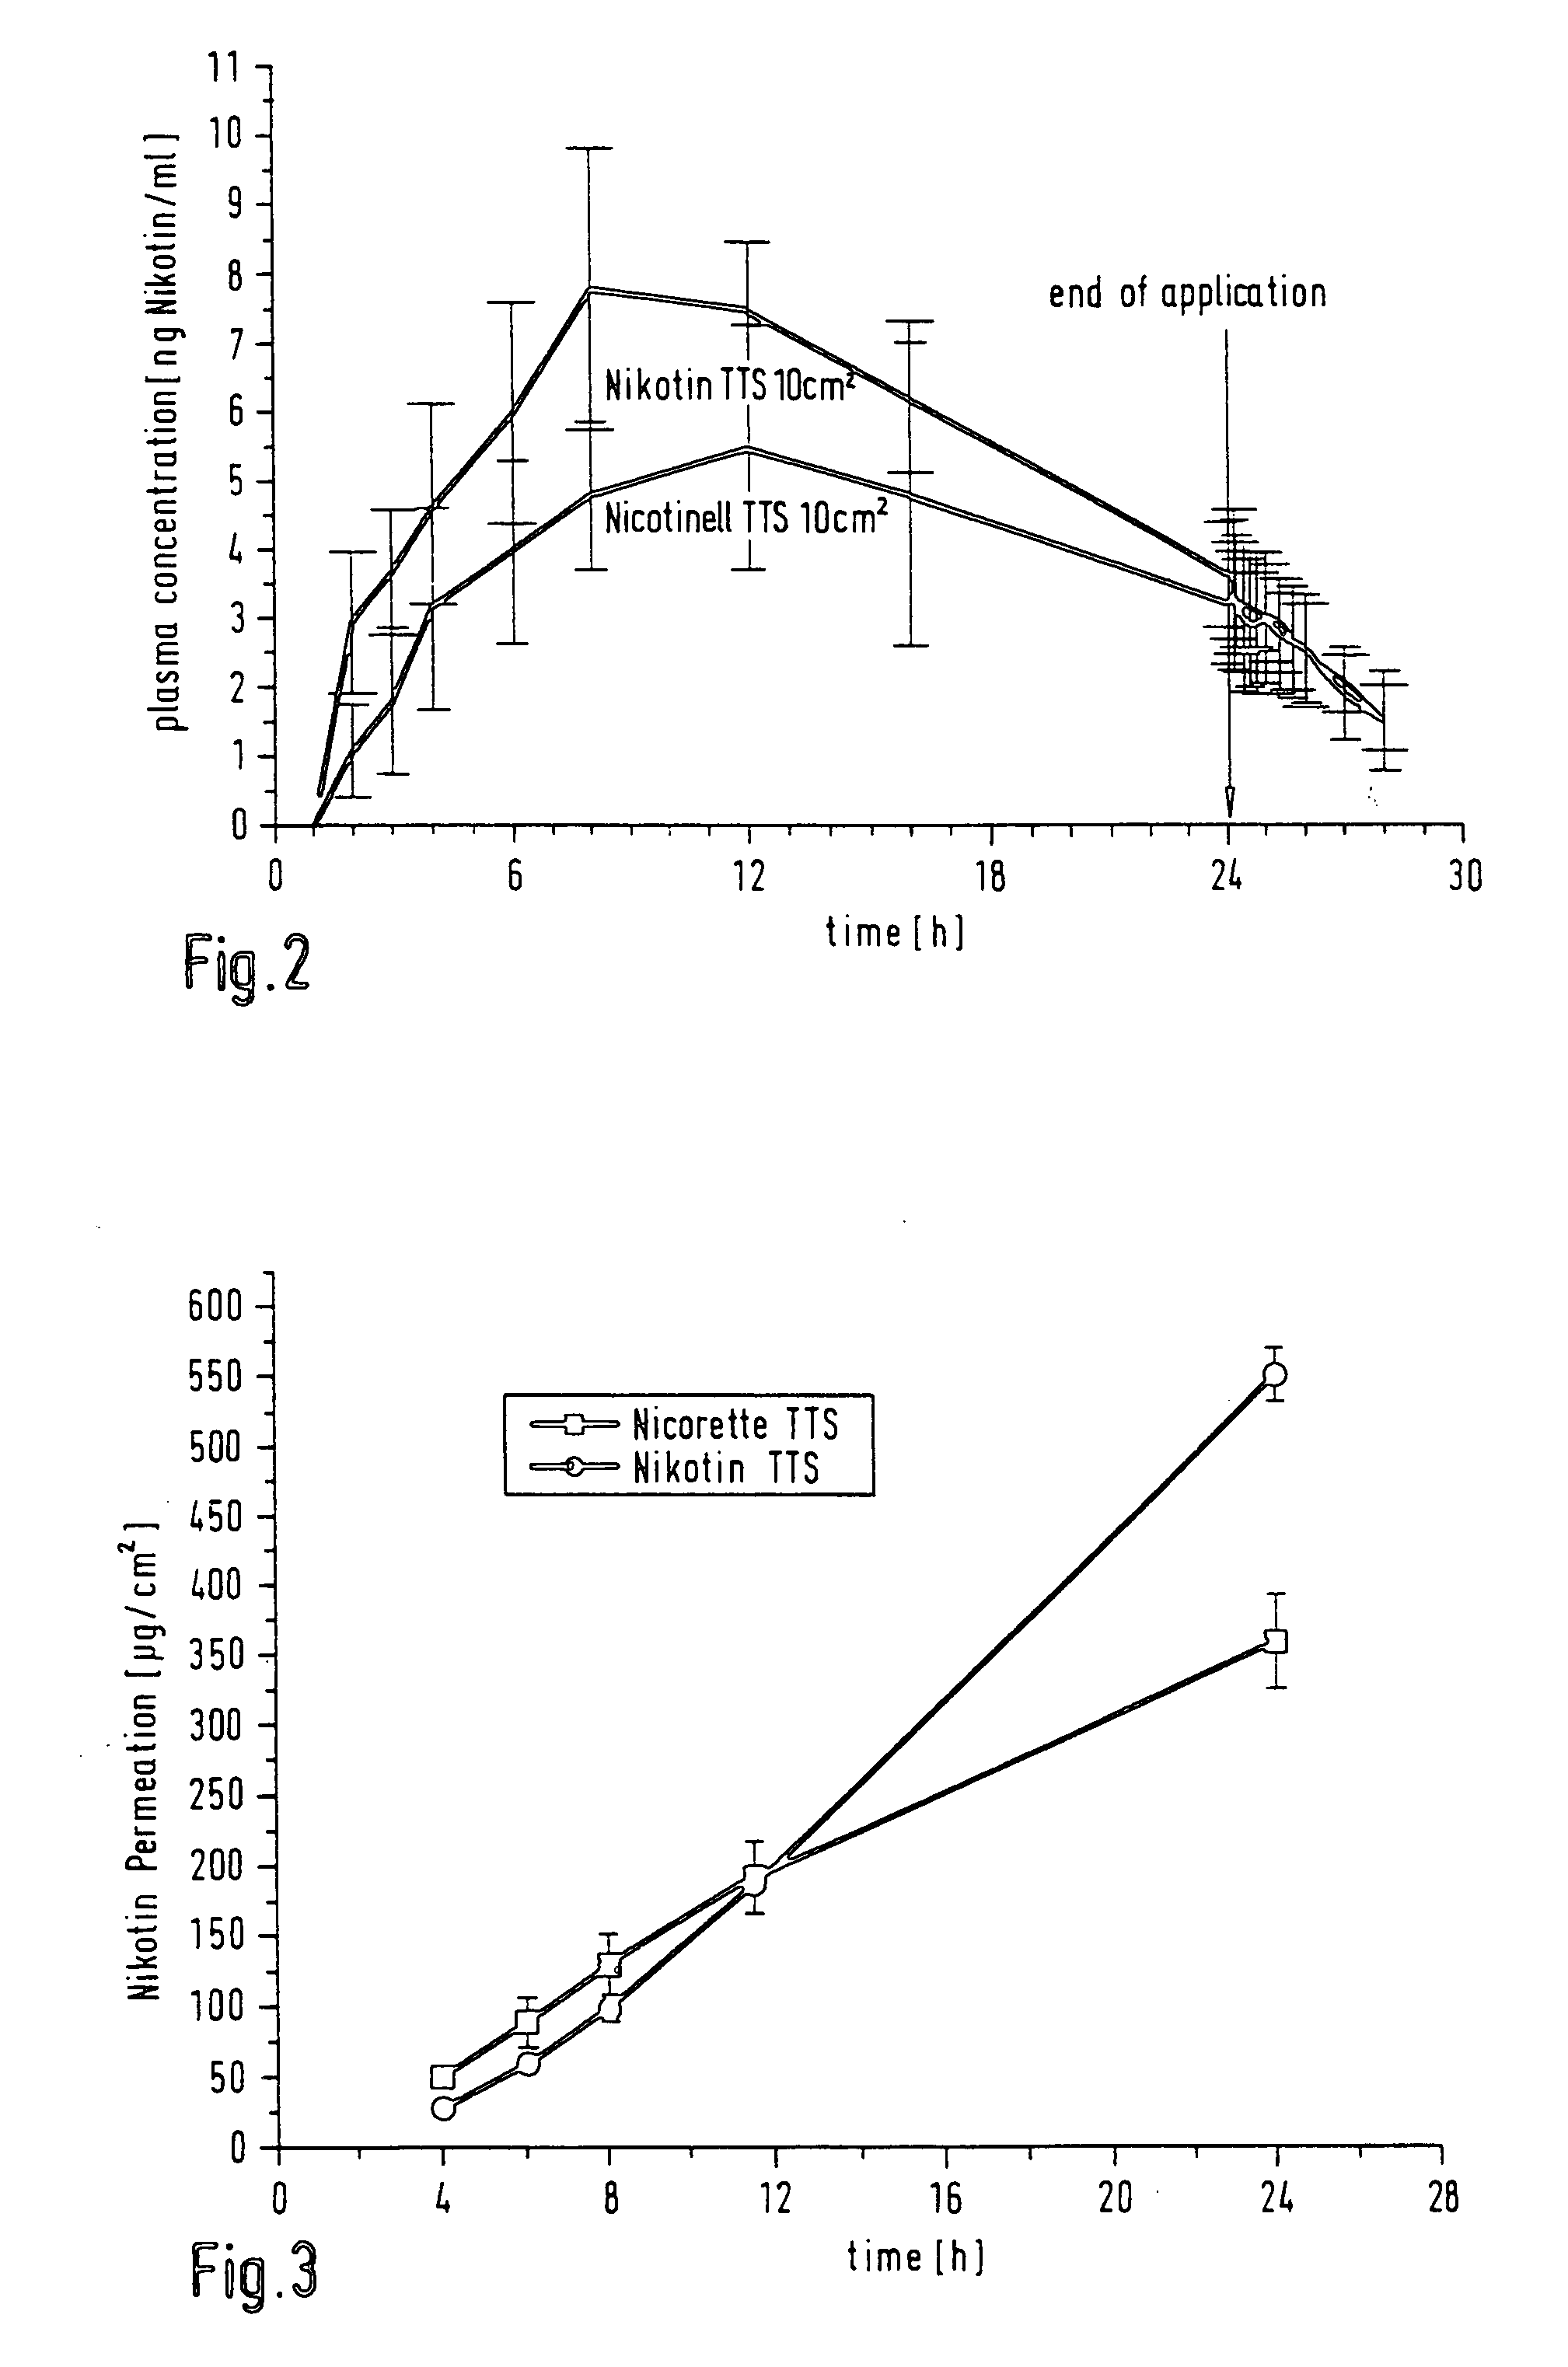 Highly flexible transdermal therapeutic system having nicotine as active substance